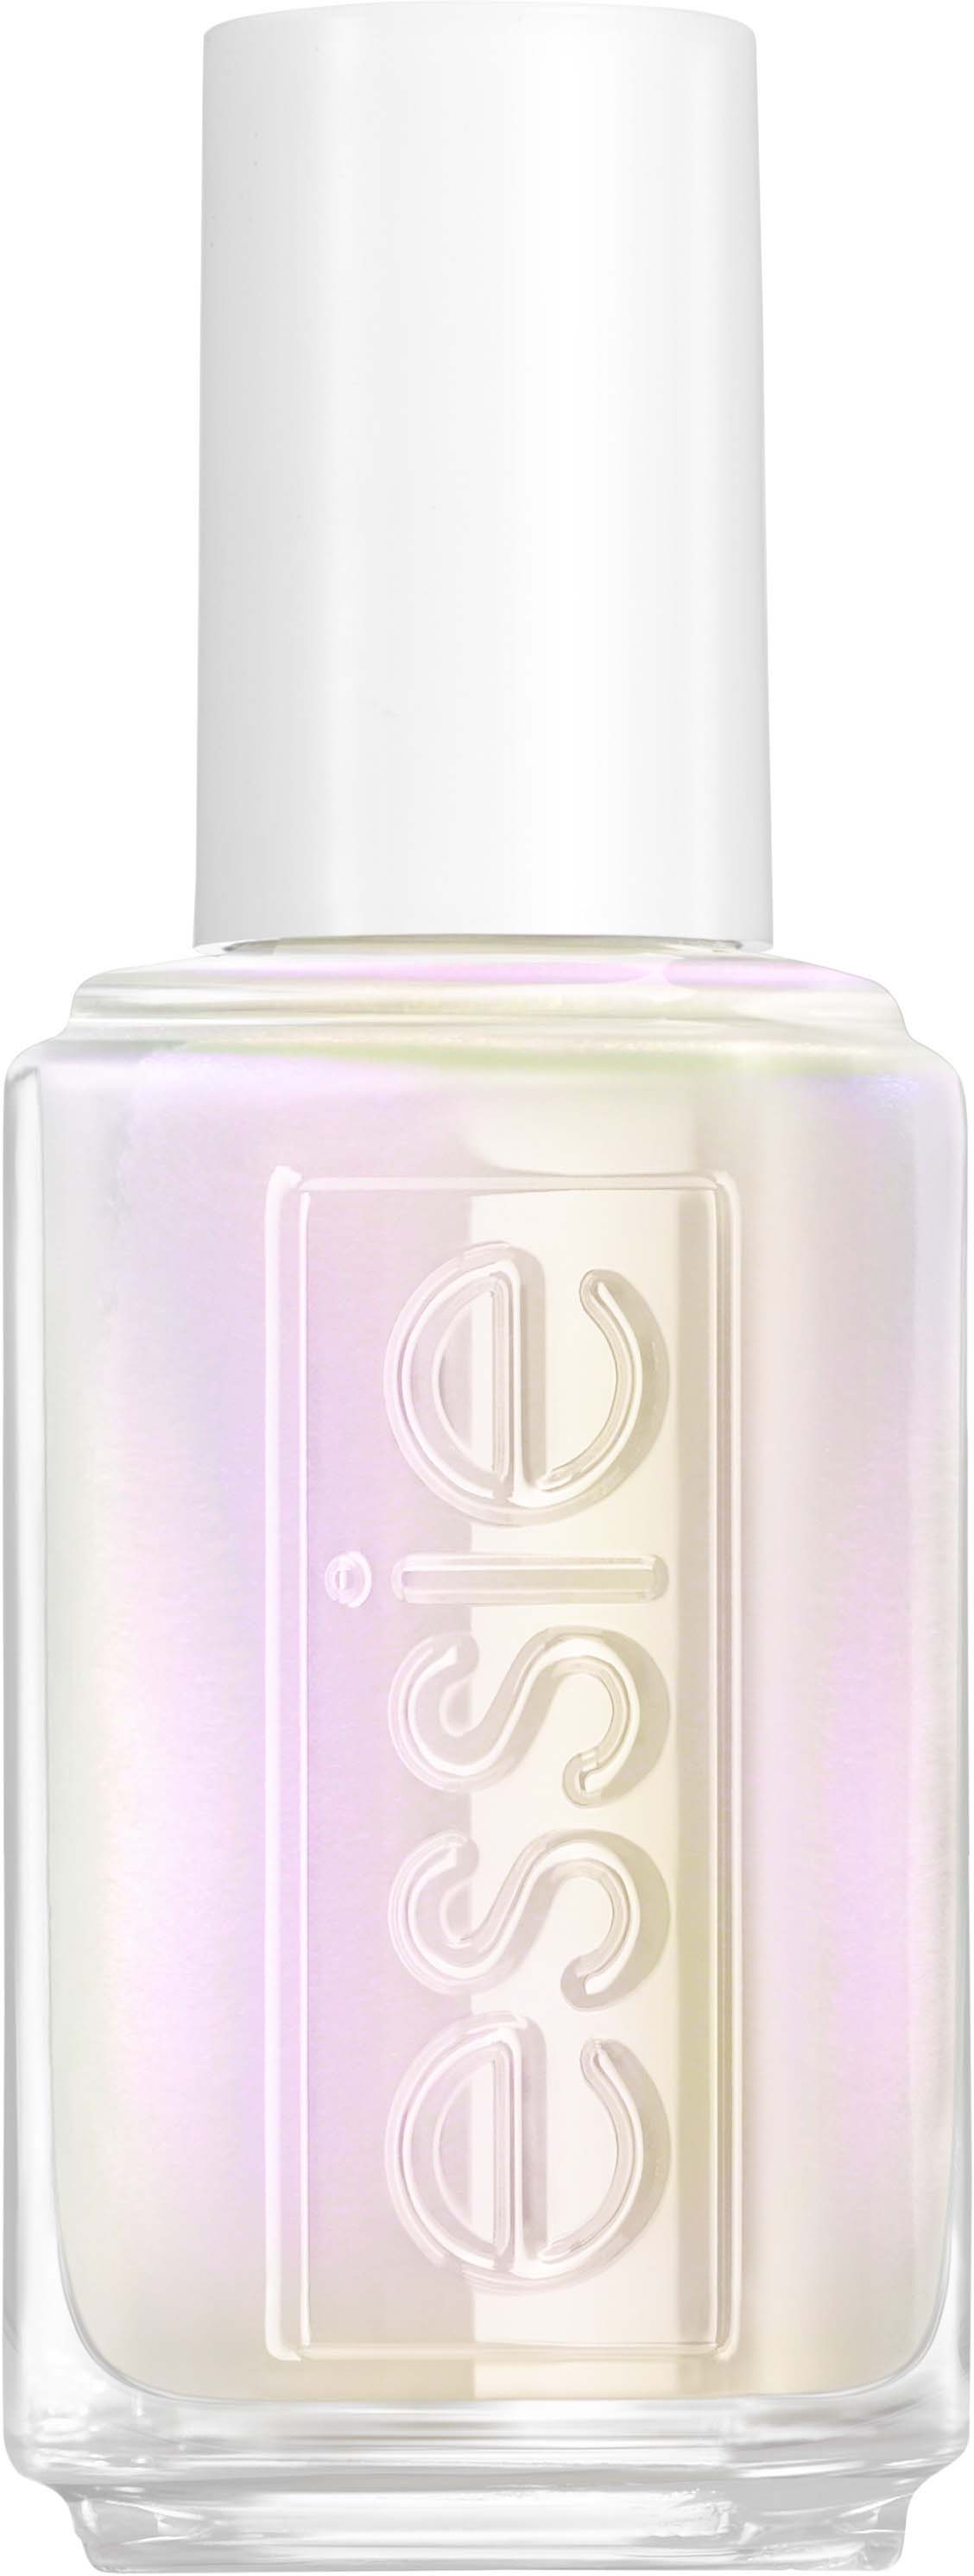 Essie Nail Expressie 460 Iced Out FX Filter Top Coat 10 ml